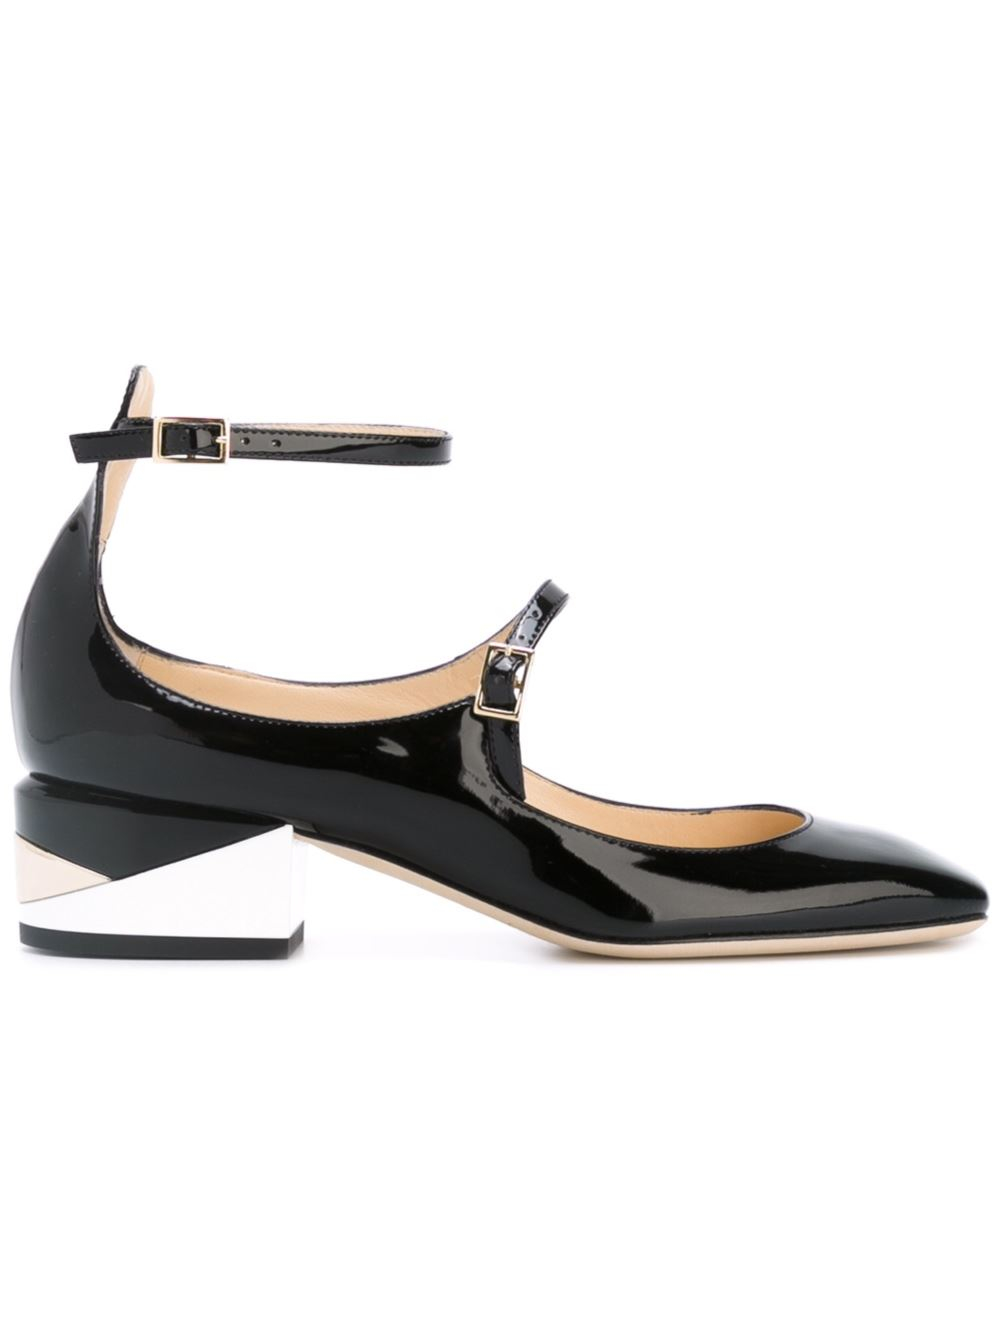 Jimmy Choo Leather Wilbur Square Toe Mary Jane Pump in Black Patent ...